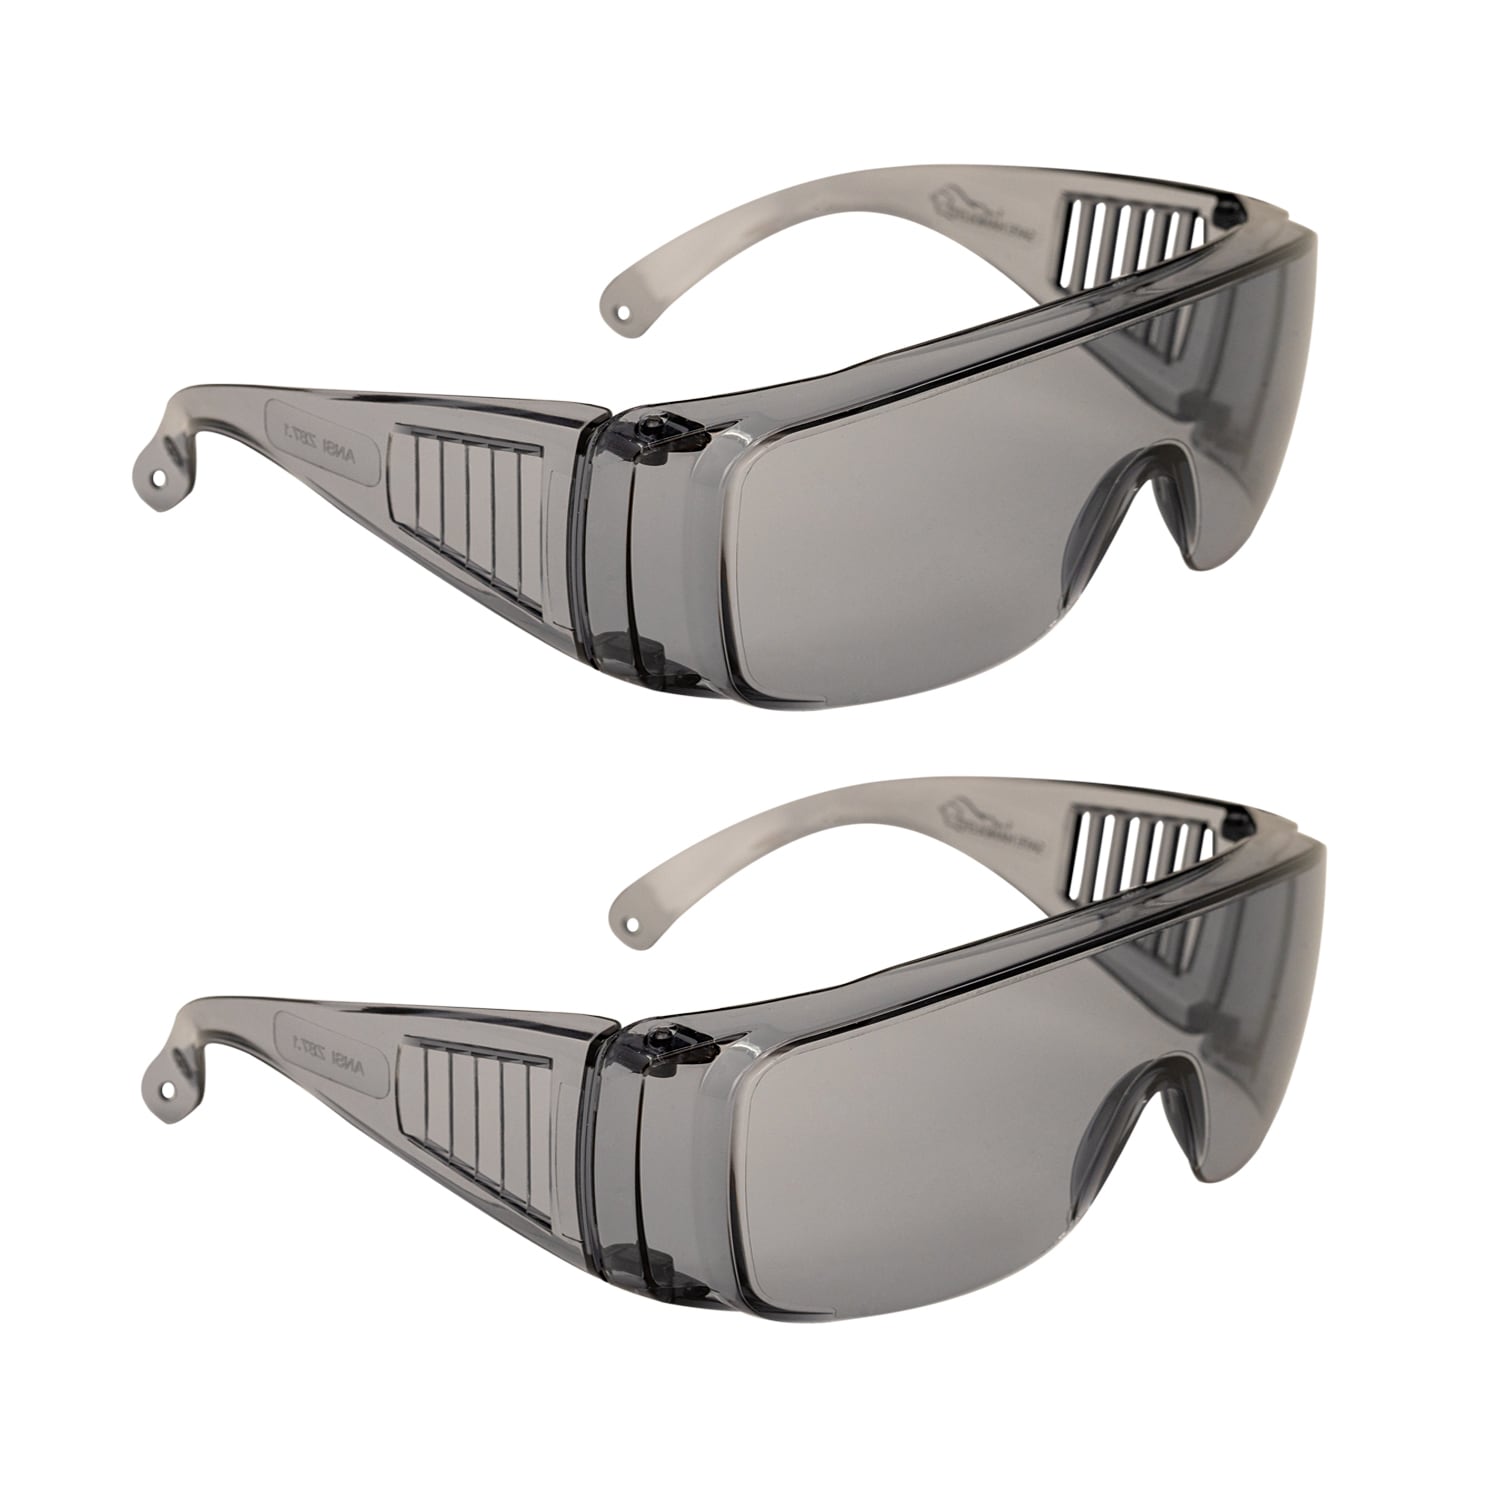 Rugged Blue Adult Unisex Small Faces Safety Sunglasses Work- Gray - 3PK